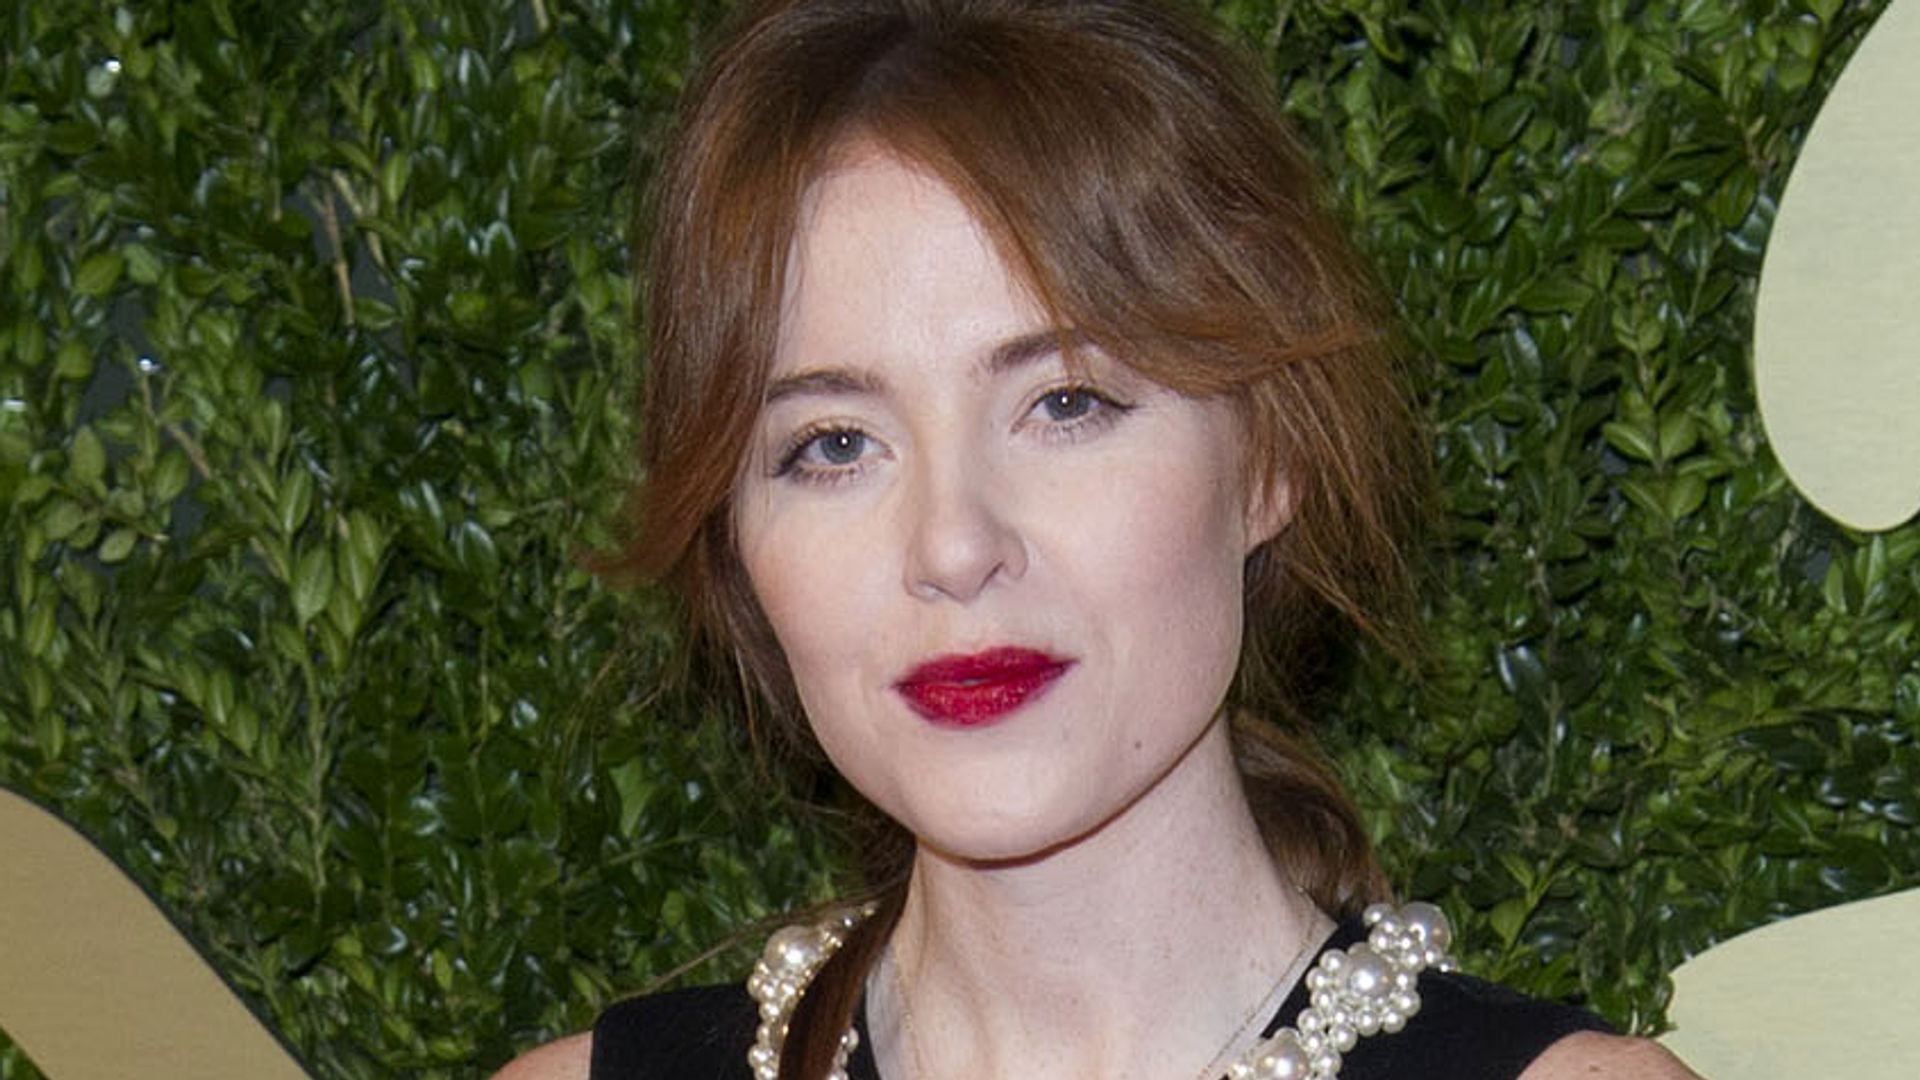 Angela Scanlon in a black dress and red lipstick against a leafy backdrop